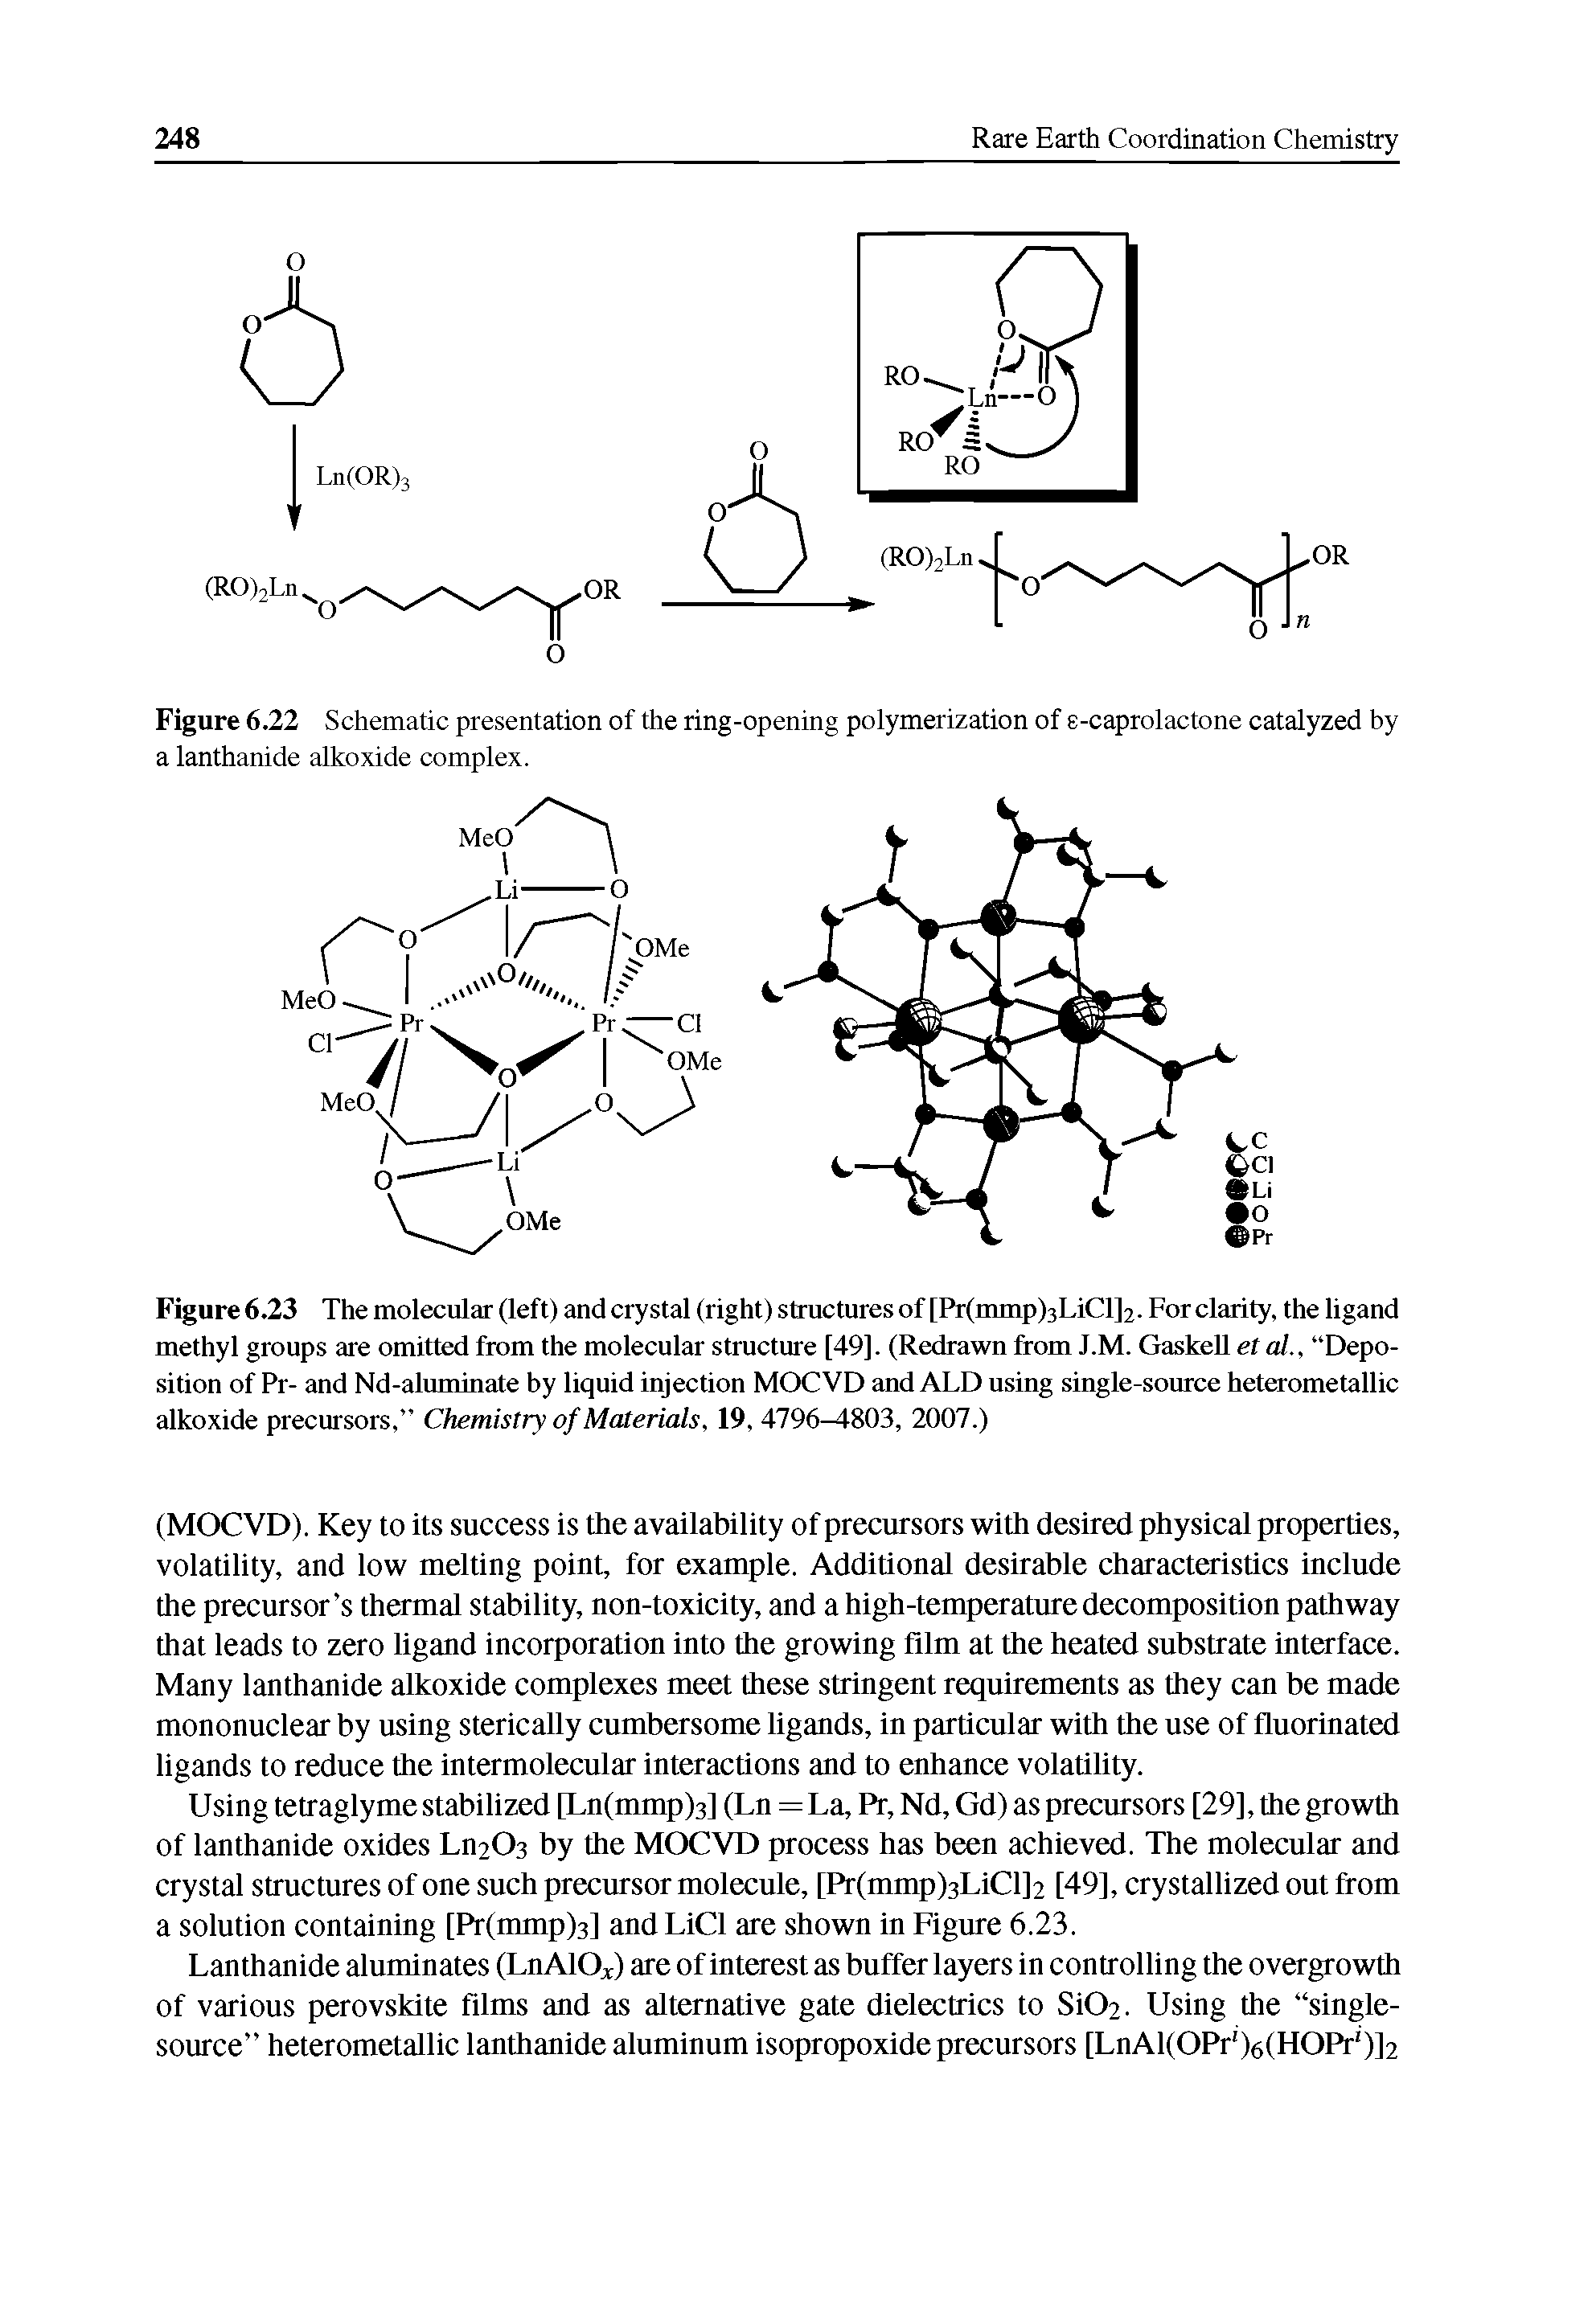 Figure 6.23 The molecular (left) and crystal (right) structures of [Pr(mmp)3LiCl]2. For clarity, the ligand methyl groups are omitted from the molecular structure [49]. (Redrawn from J.M. Gaskell et al., Deposition of Pr- and Nd-almninate by liquid injection MOCVD and ALD using single-som-ce heterometallic alkoxide precursors, Chemistry of Materials, 19, 4796 803, 2007.)...